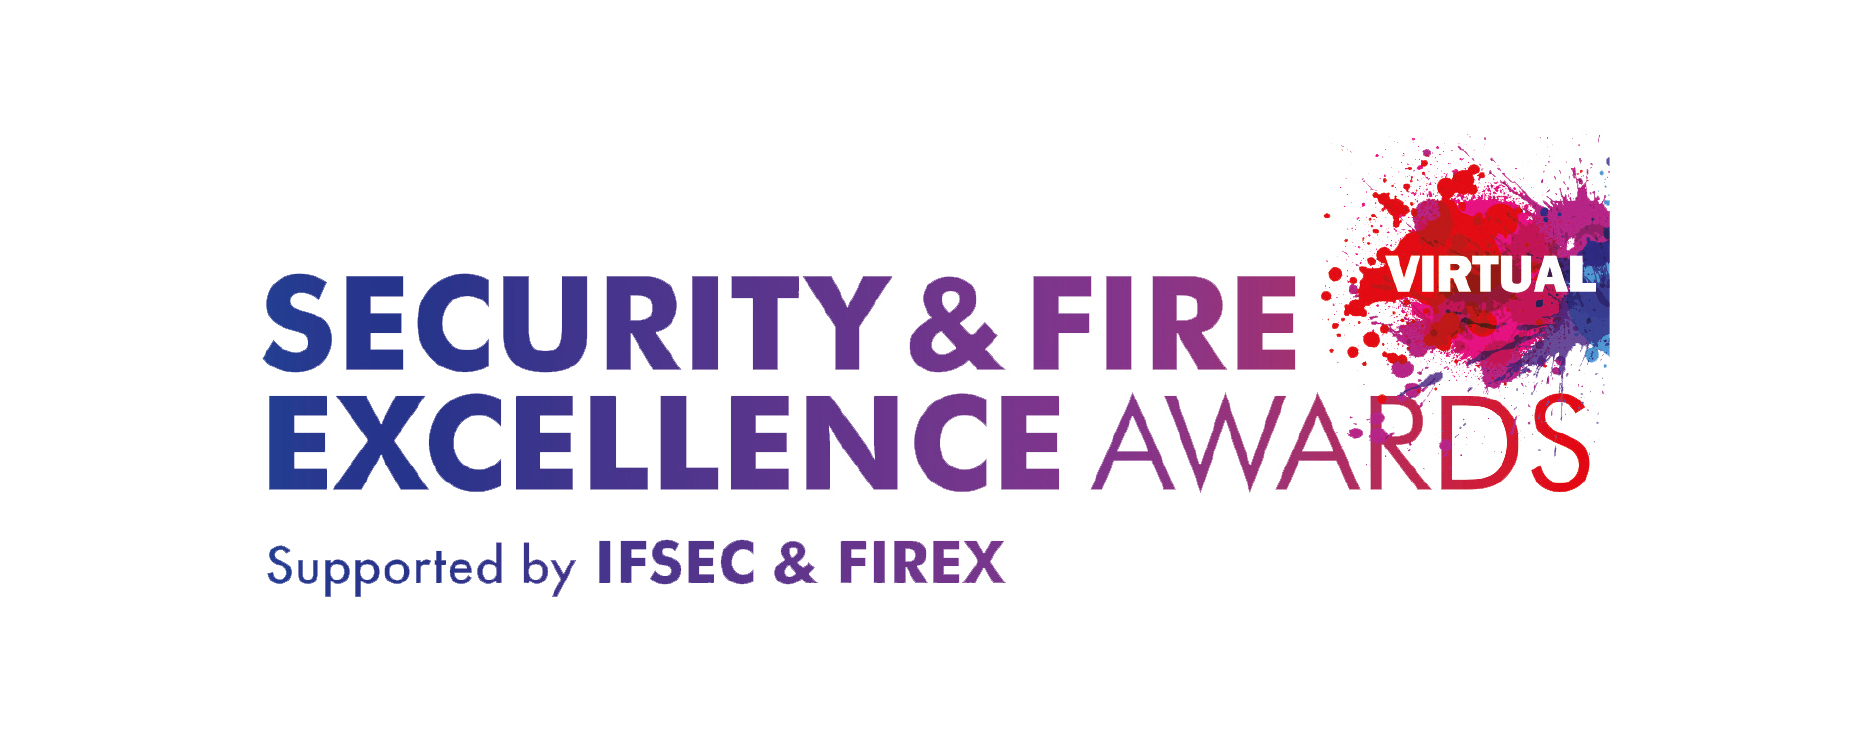 Security and Fire Excellence Awards 2020 Logo